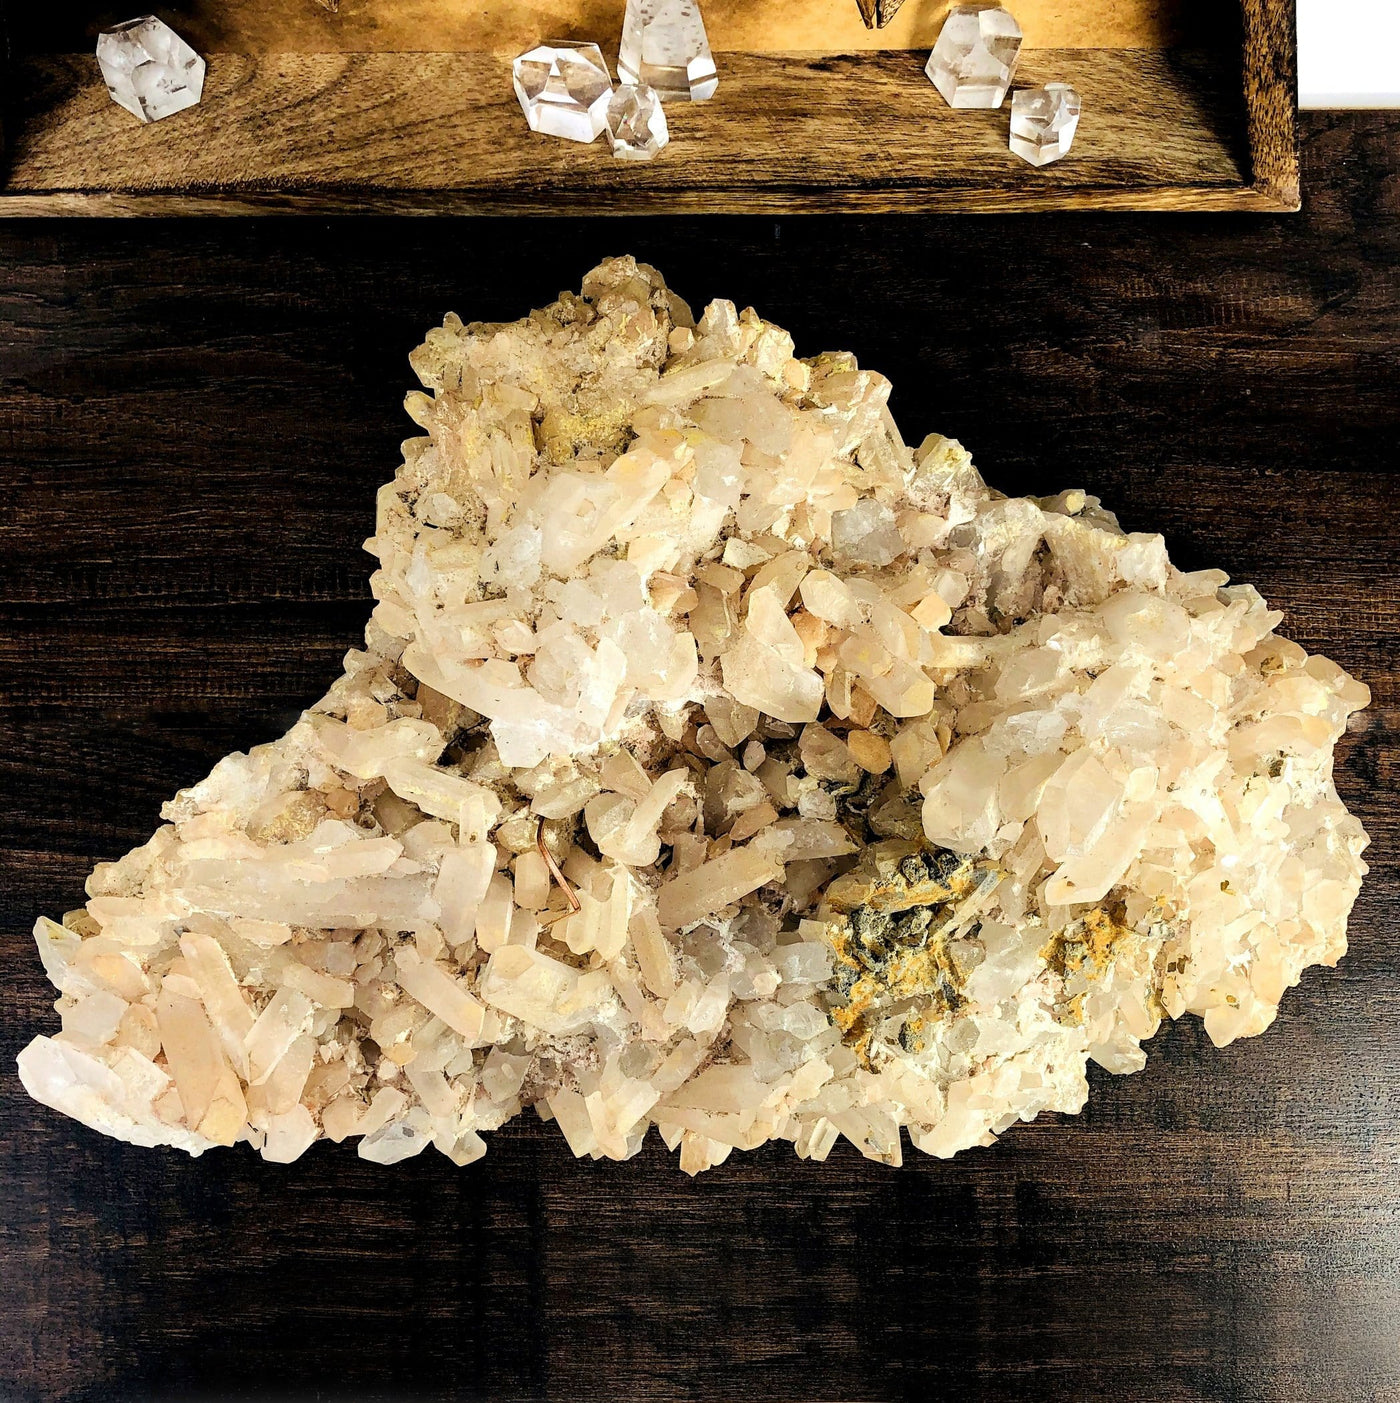 top view of Madagascar Quartz Cluster with decorations in the background